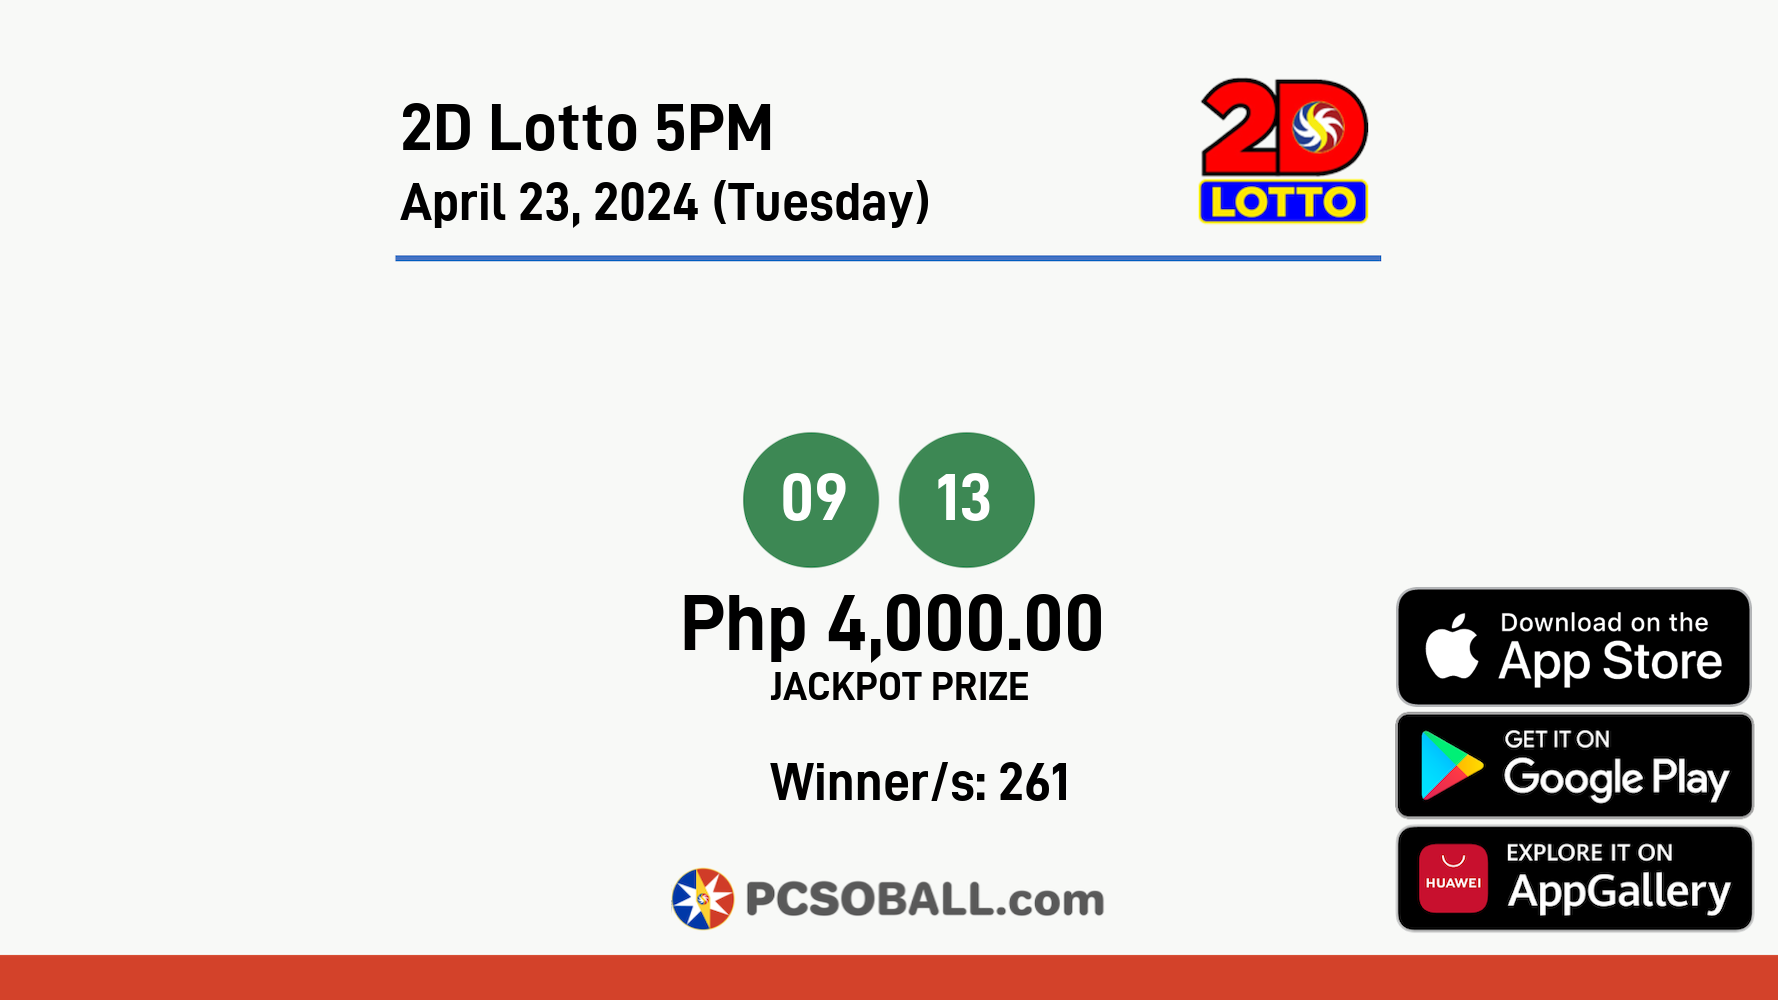 2D Lotto 5PM April 23, 2024 (Tuesday) Result